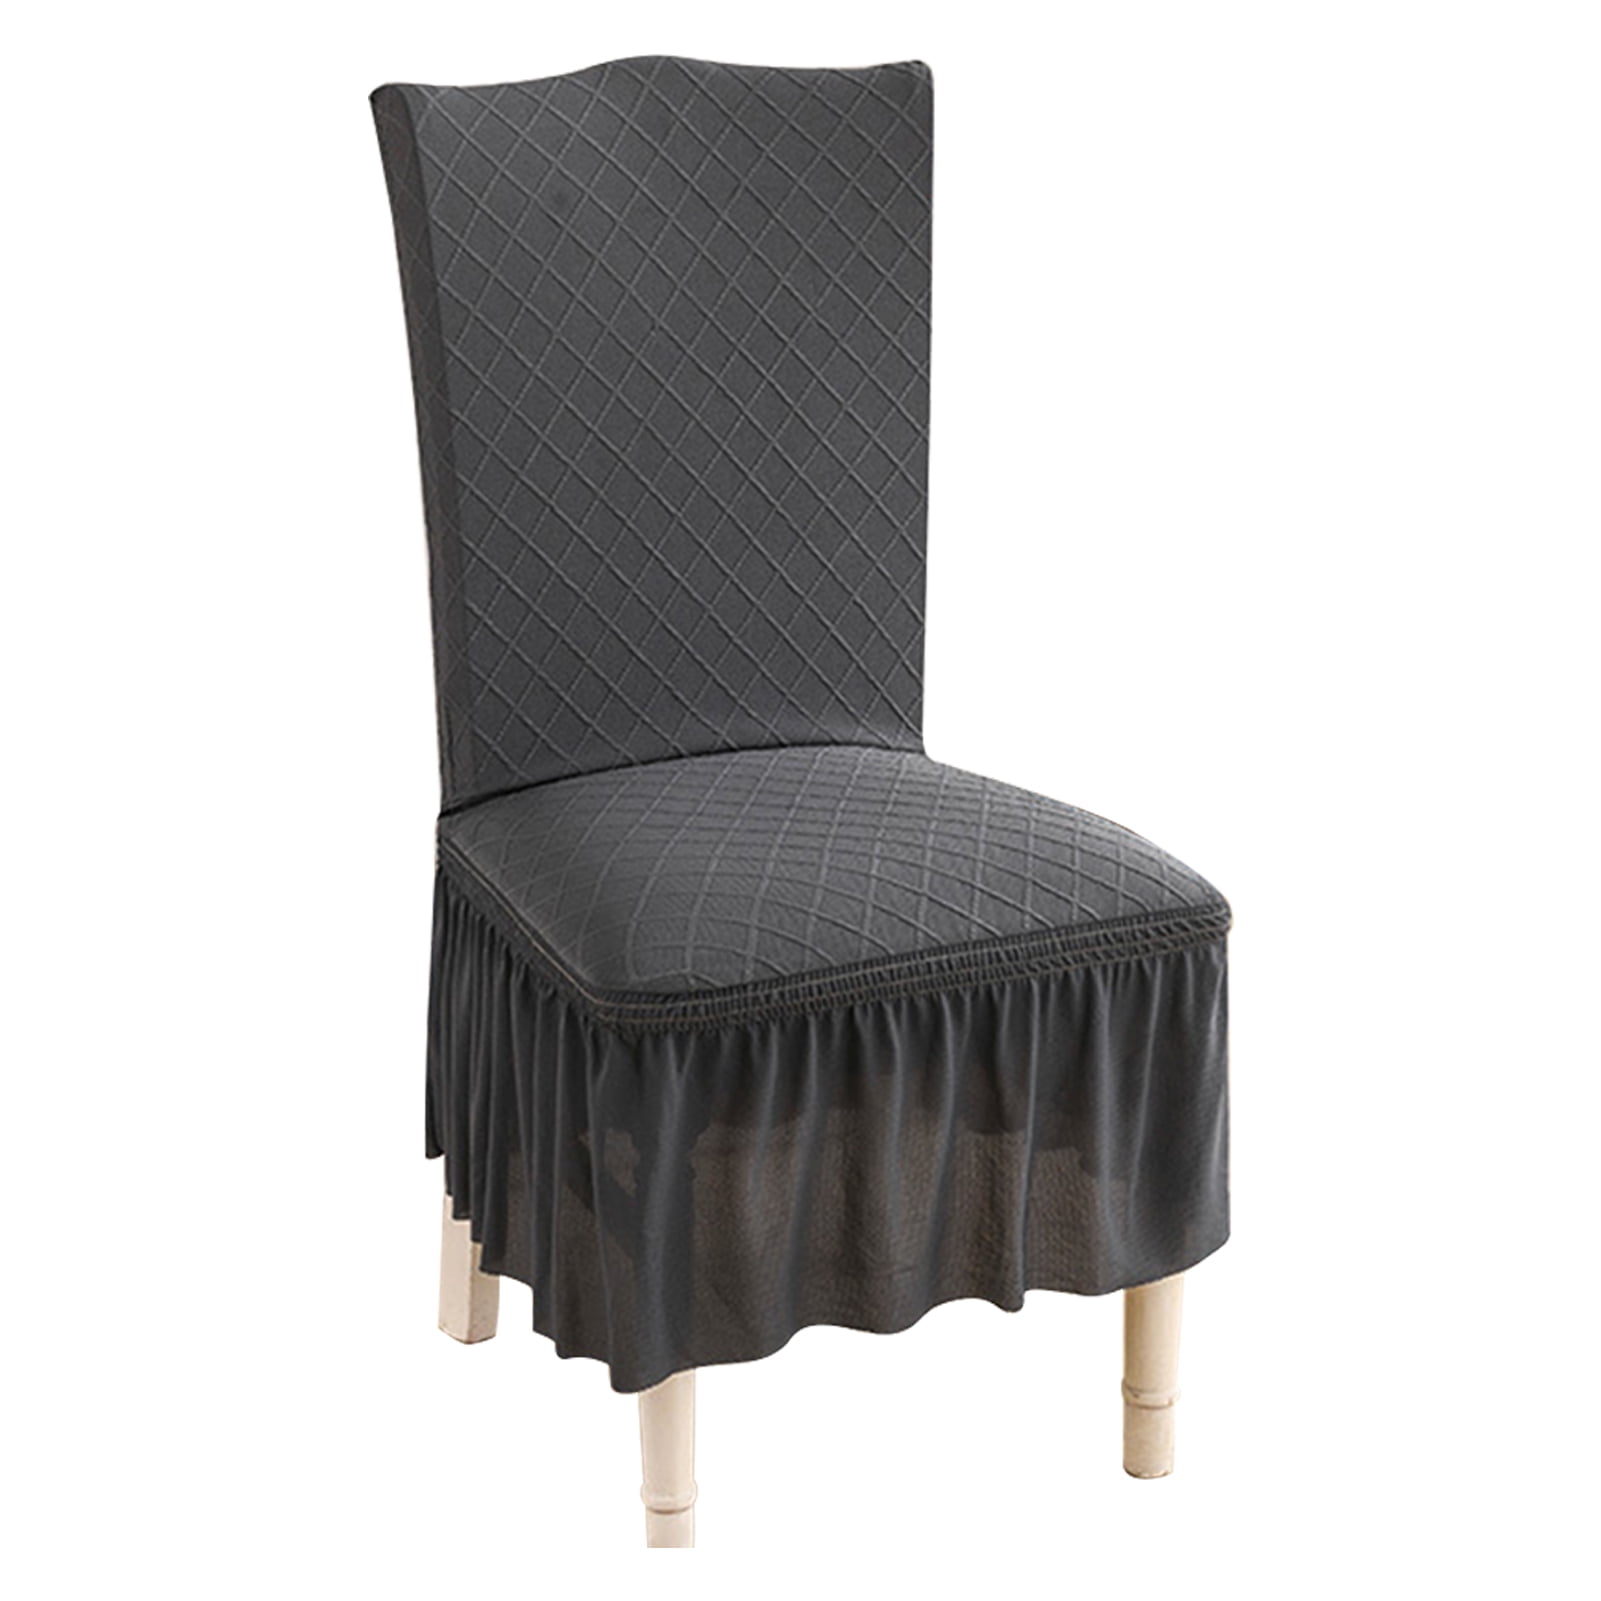 Details about   Dining Chair Cover Furniture Soft For Party Stretch Slipcover Seat Protector 